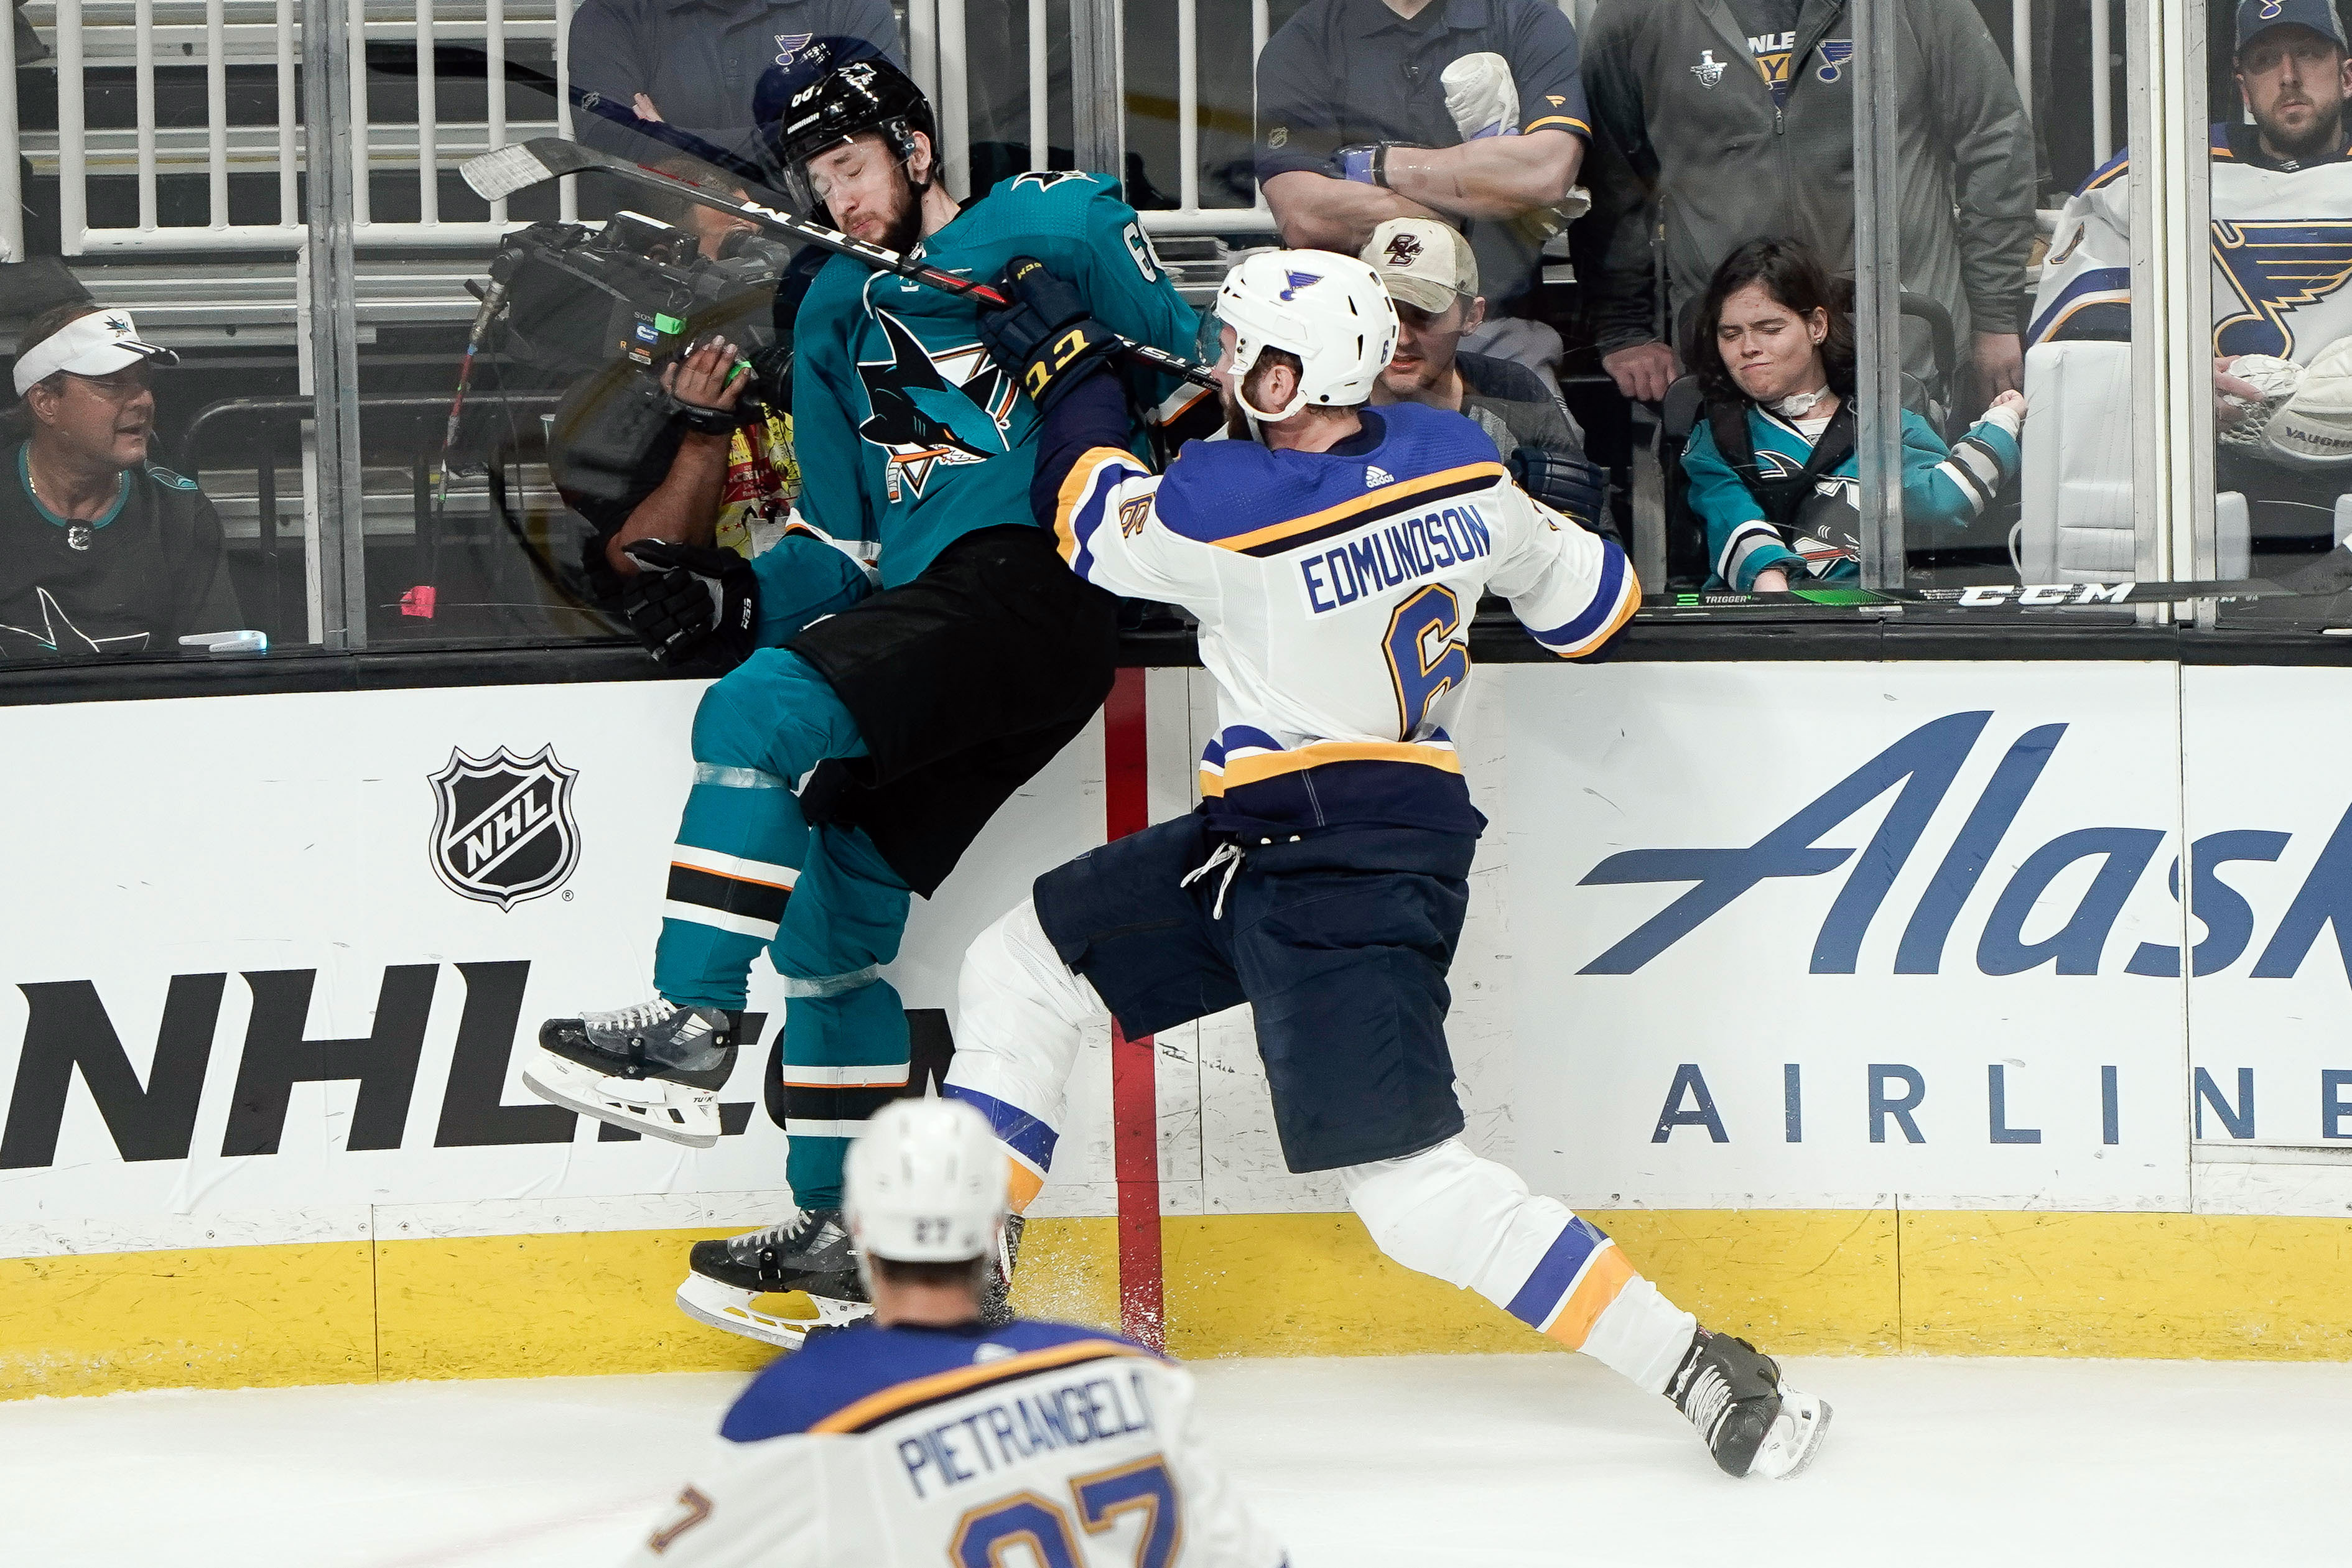 2019-05-12T012326Z_458012475_NOCID_RTRMADP_3_NHL-STANLEY-CUP-PLAYOFFS-ST-LOUIS-BLUES-AT-SAN-JOSE-SHARKS